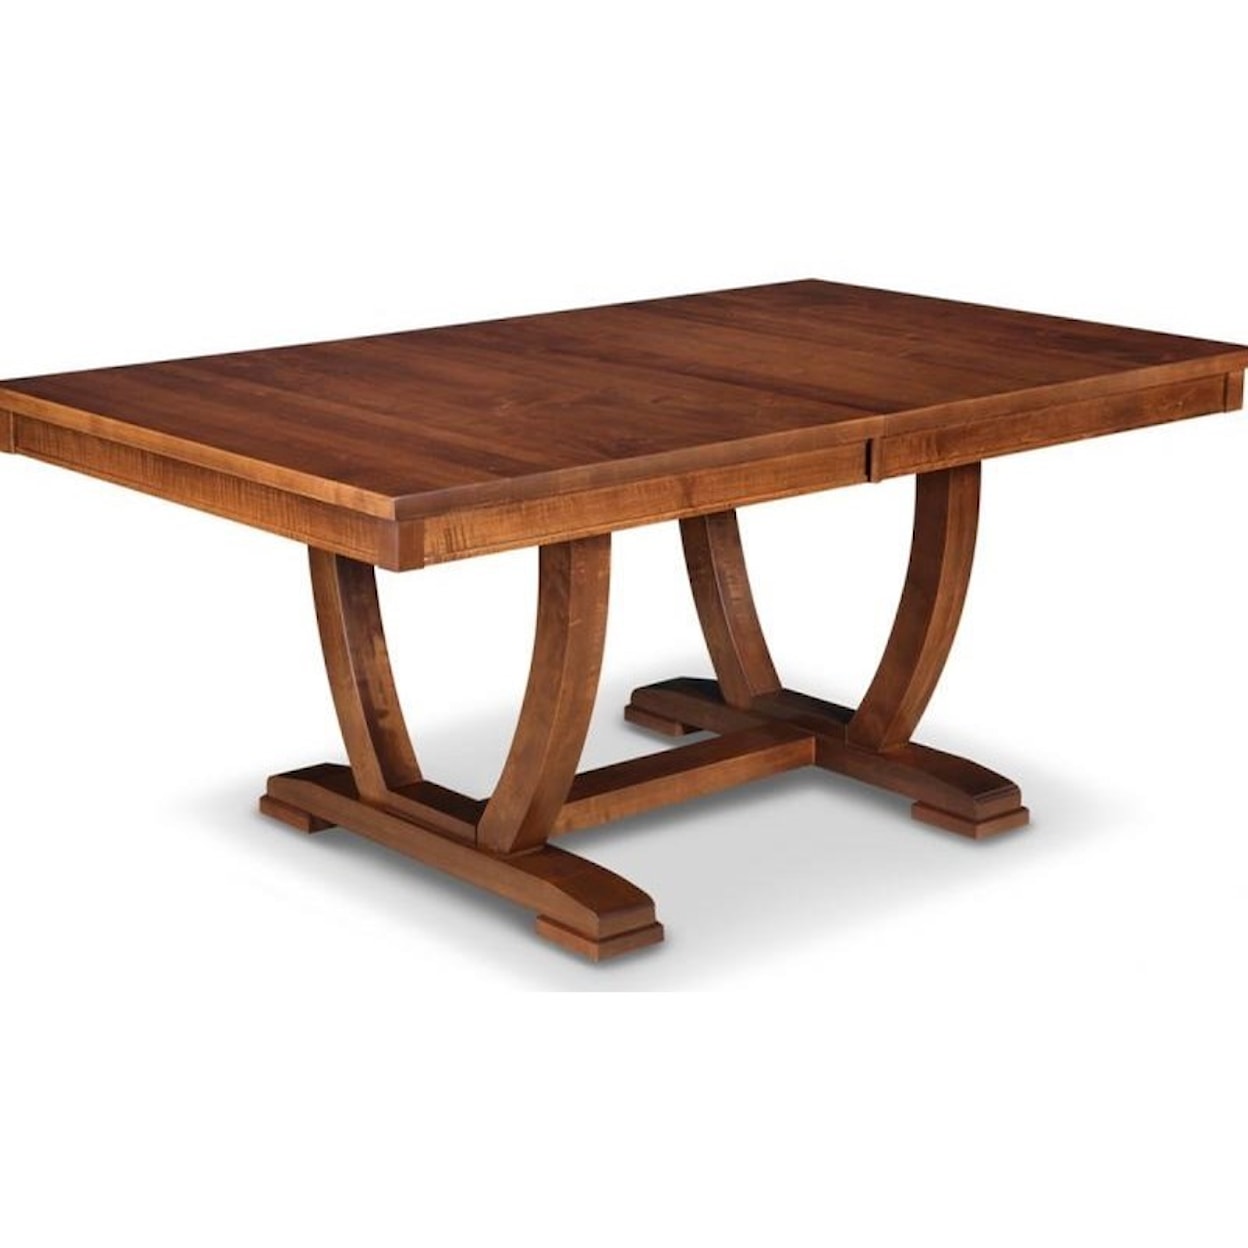 Handstone Florence 48x84" Solid Top Trestle Dining Table